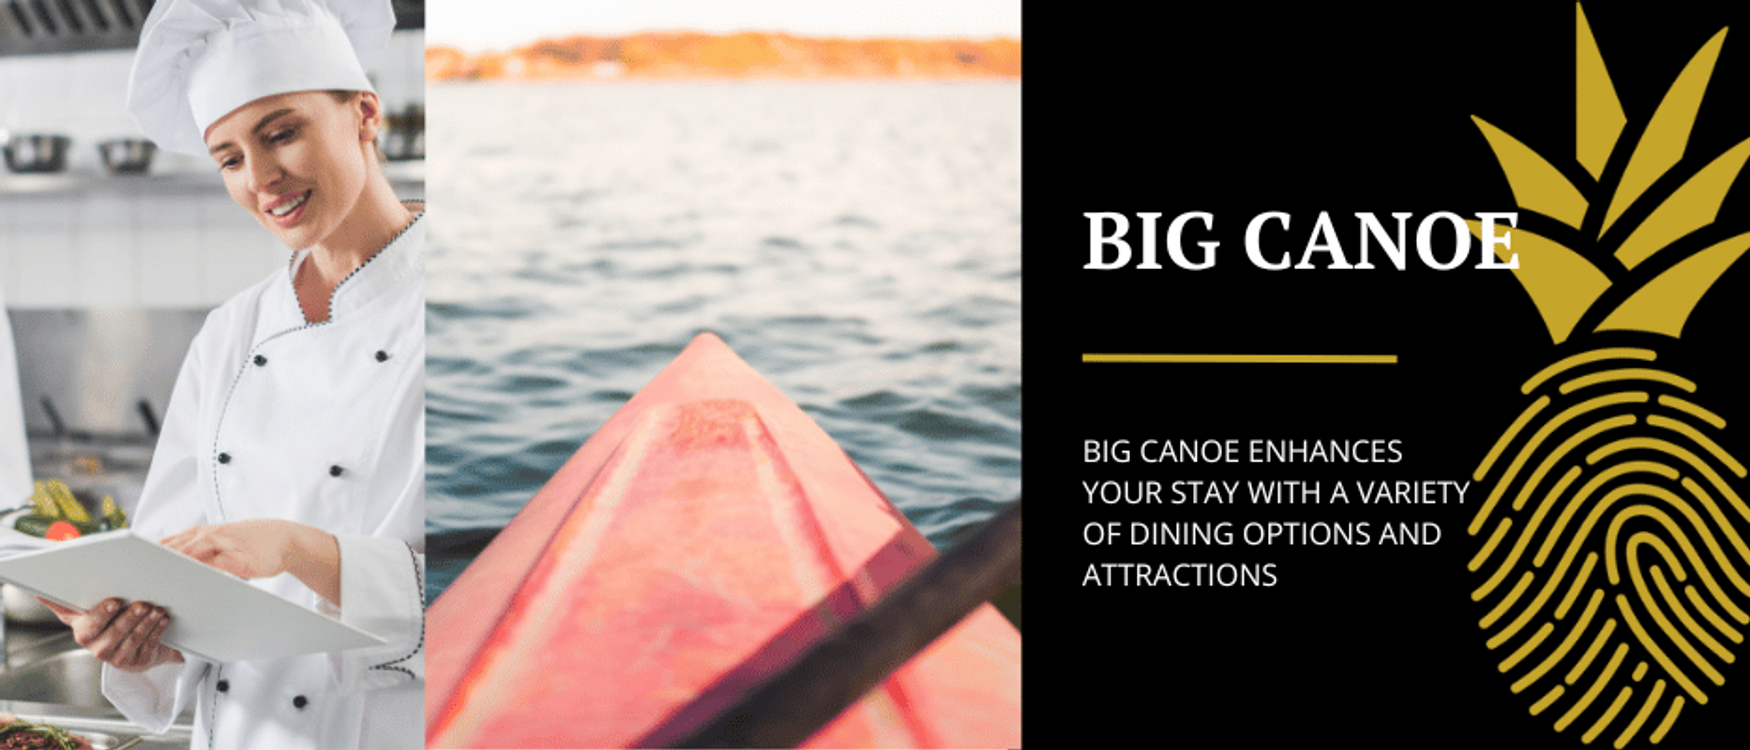 A view of the favorite restaurants and attractions in Big Canoe